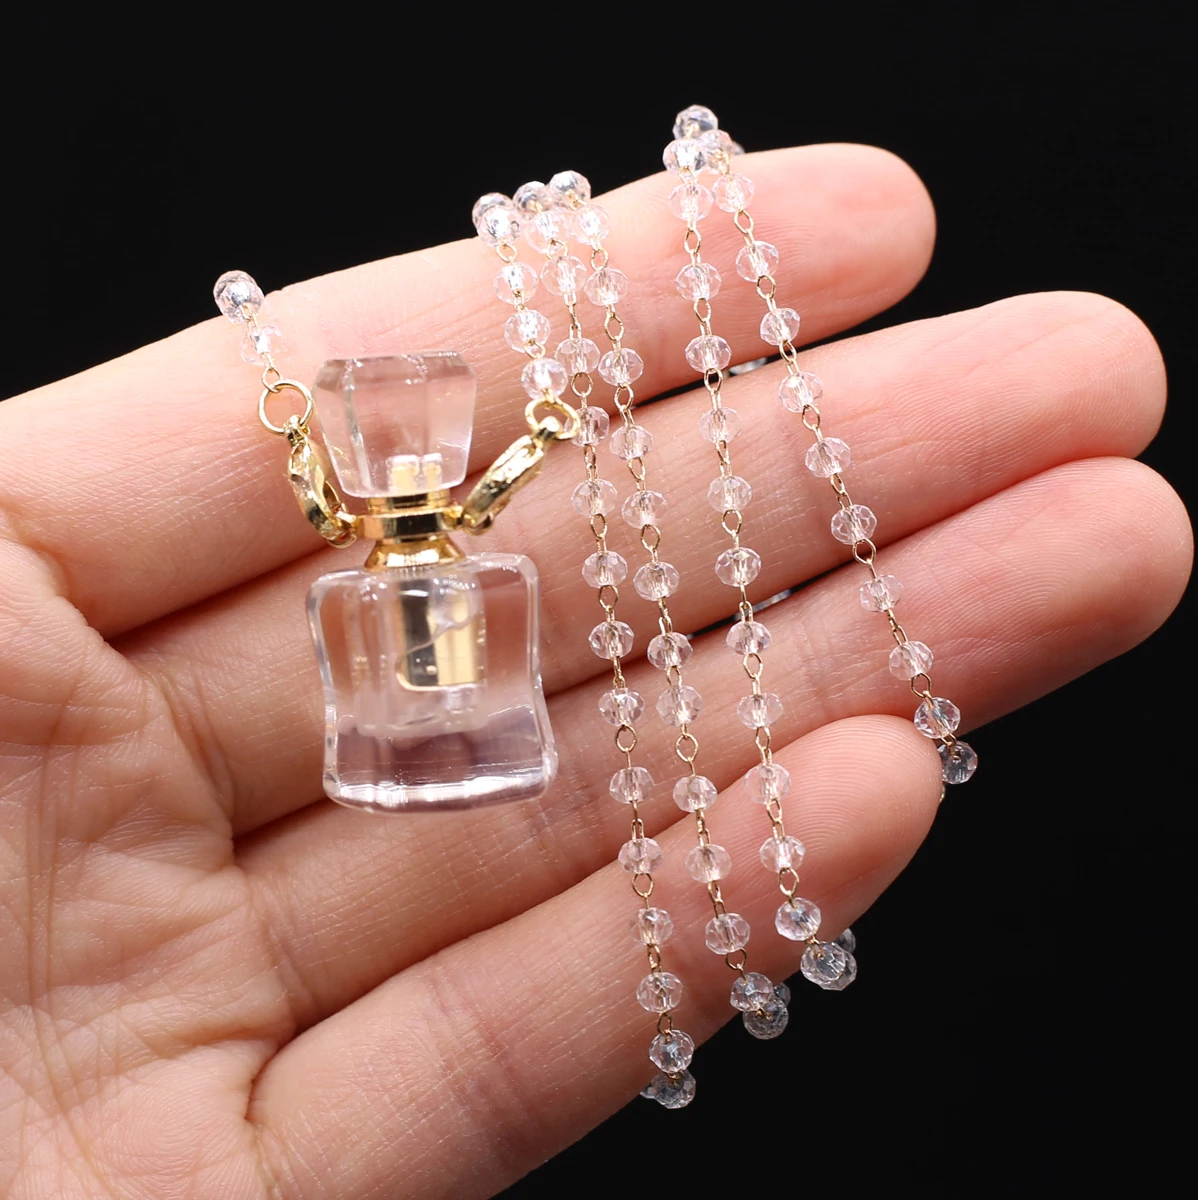 

Essential Oil Diffuser Perfume Bottle Gemstone Aura Cube White Crystal Agate Charm Pendulum Pendant Necklace Jewelry Gift